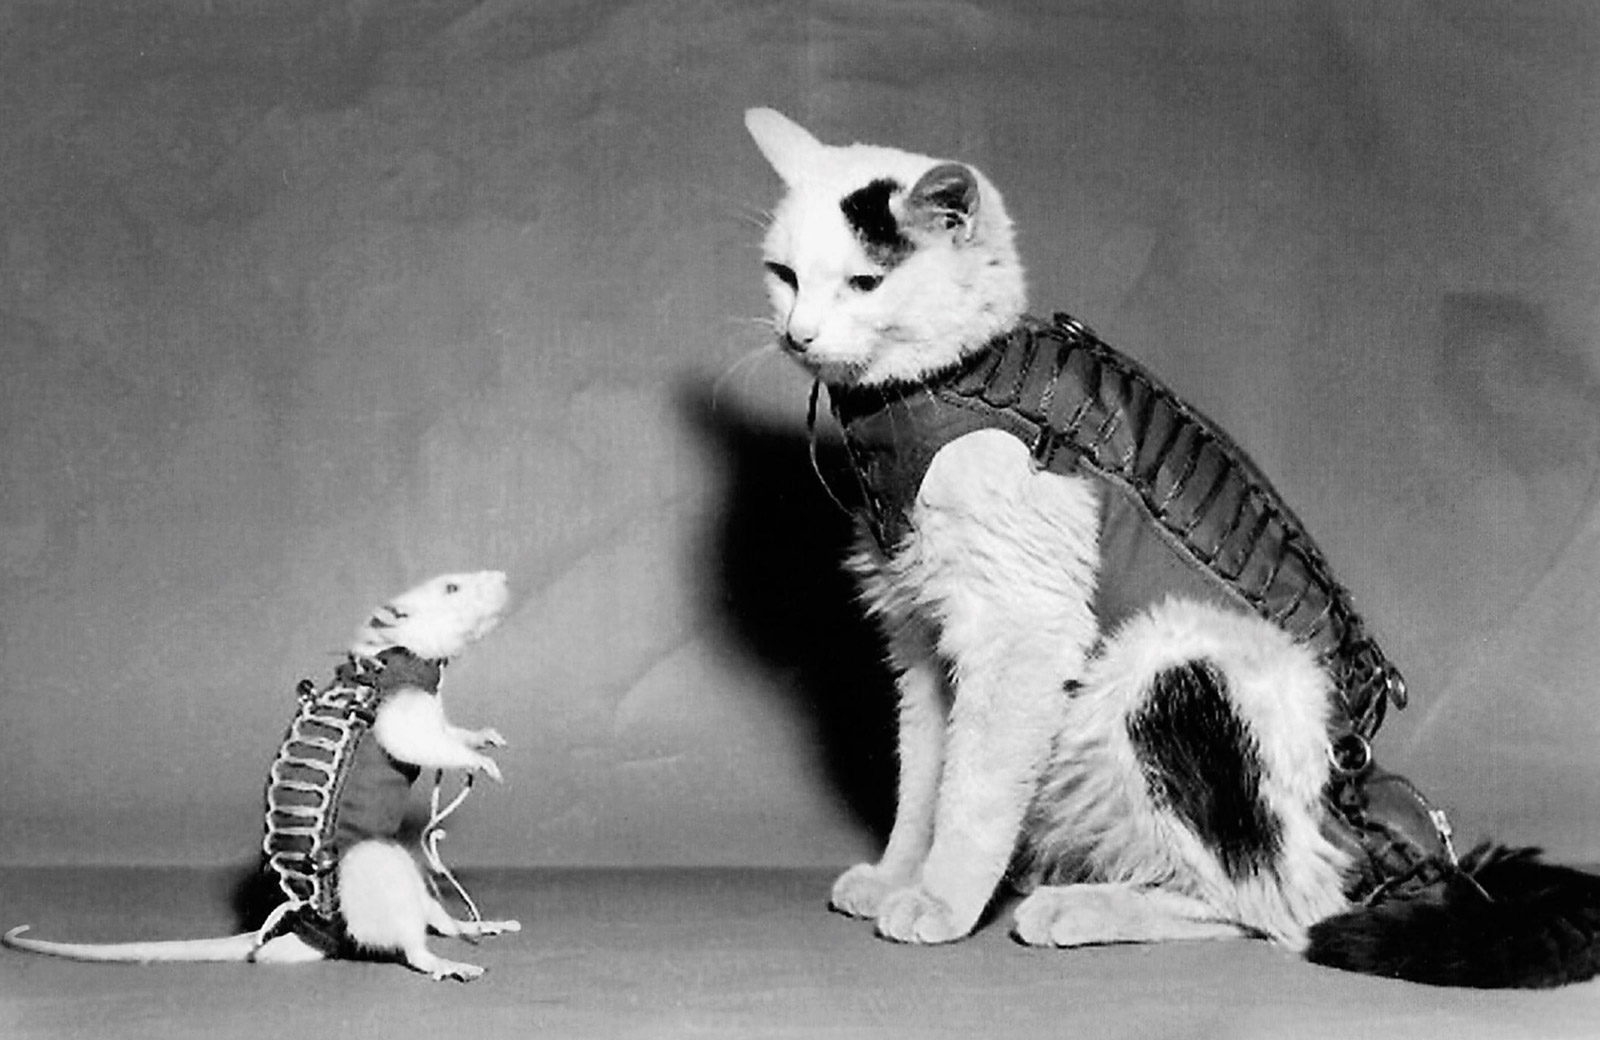 A February 1961 photograph of Hector, the first space rat launched by the French, in his miniature space suit. He is pictured along with a cat in training for a rocket flight.